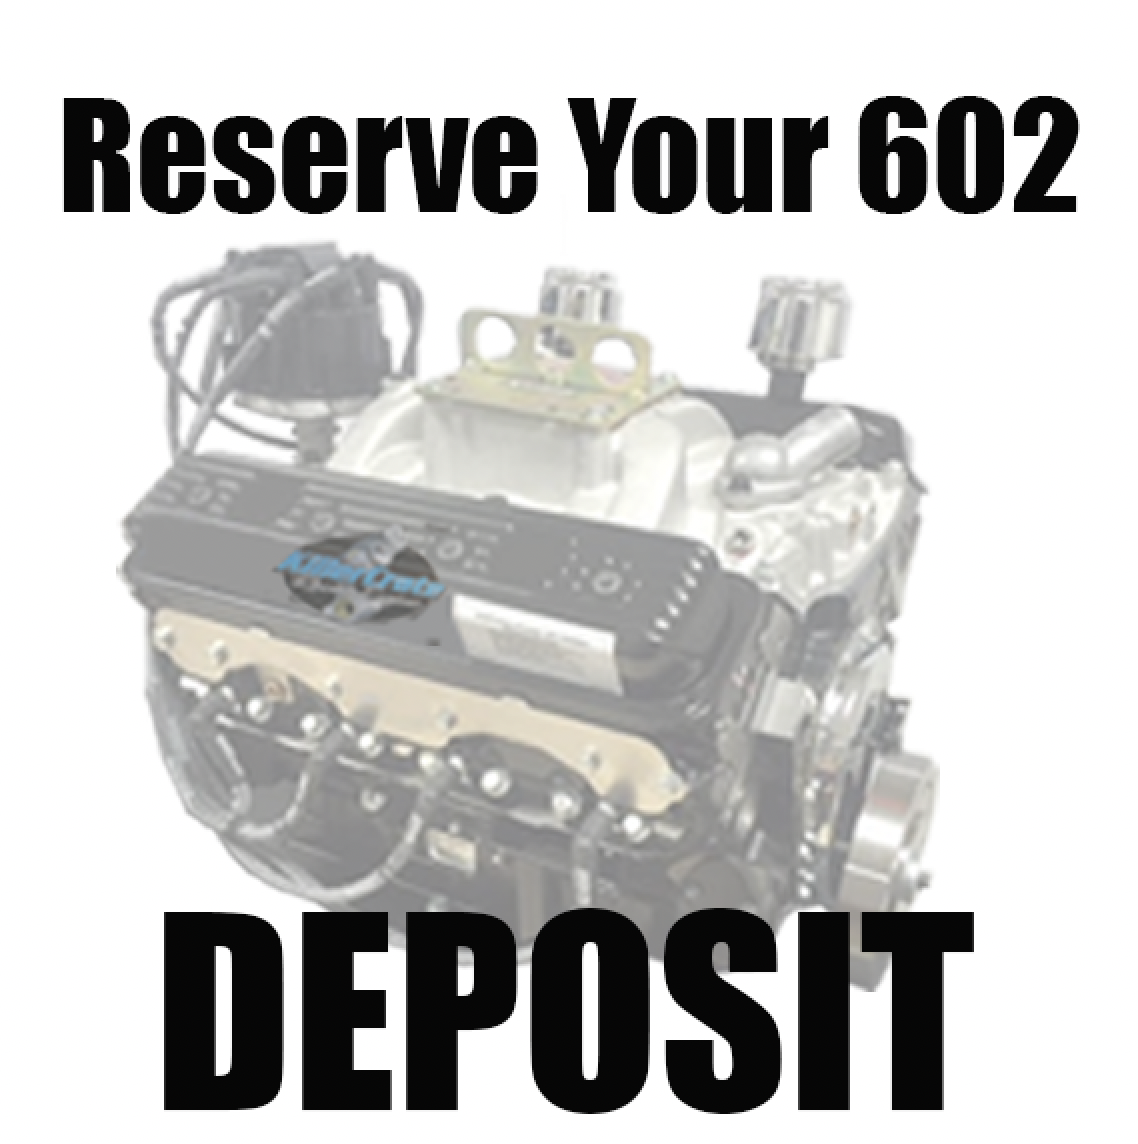 602 Crate Engine Reservation